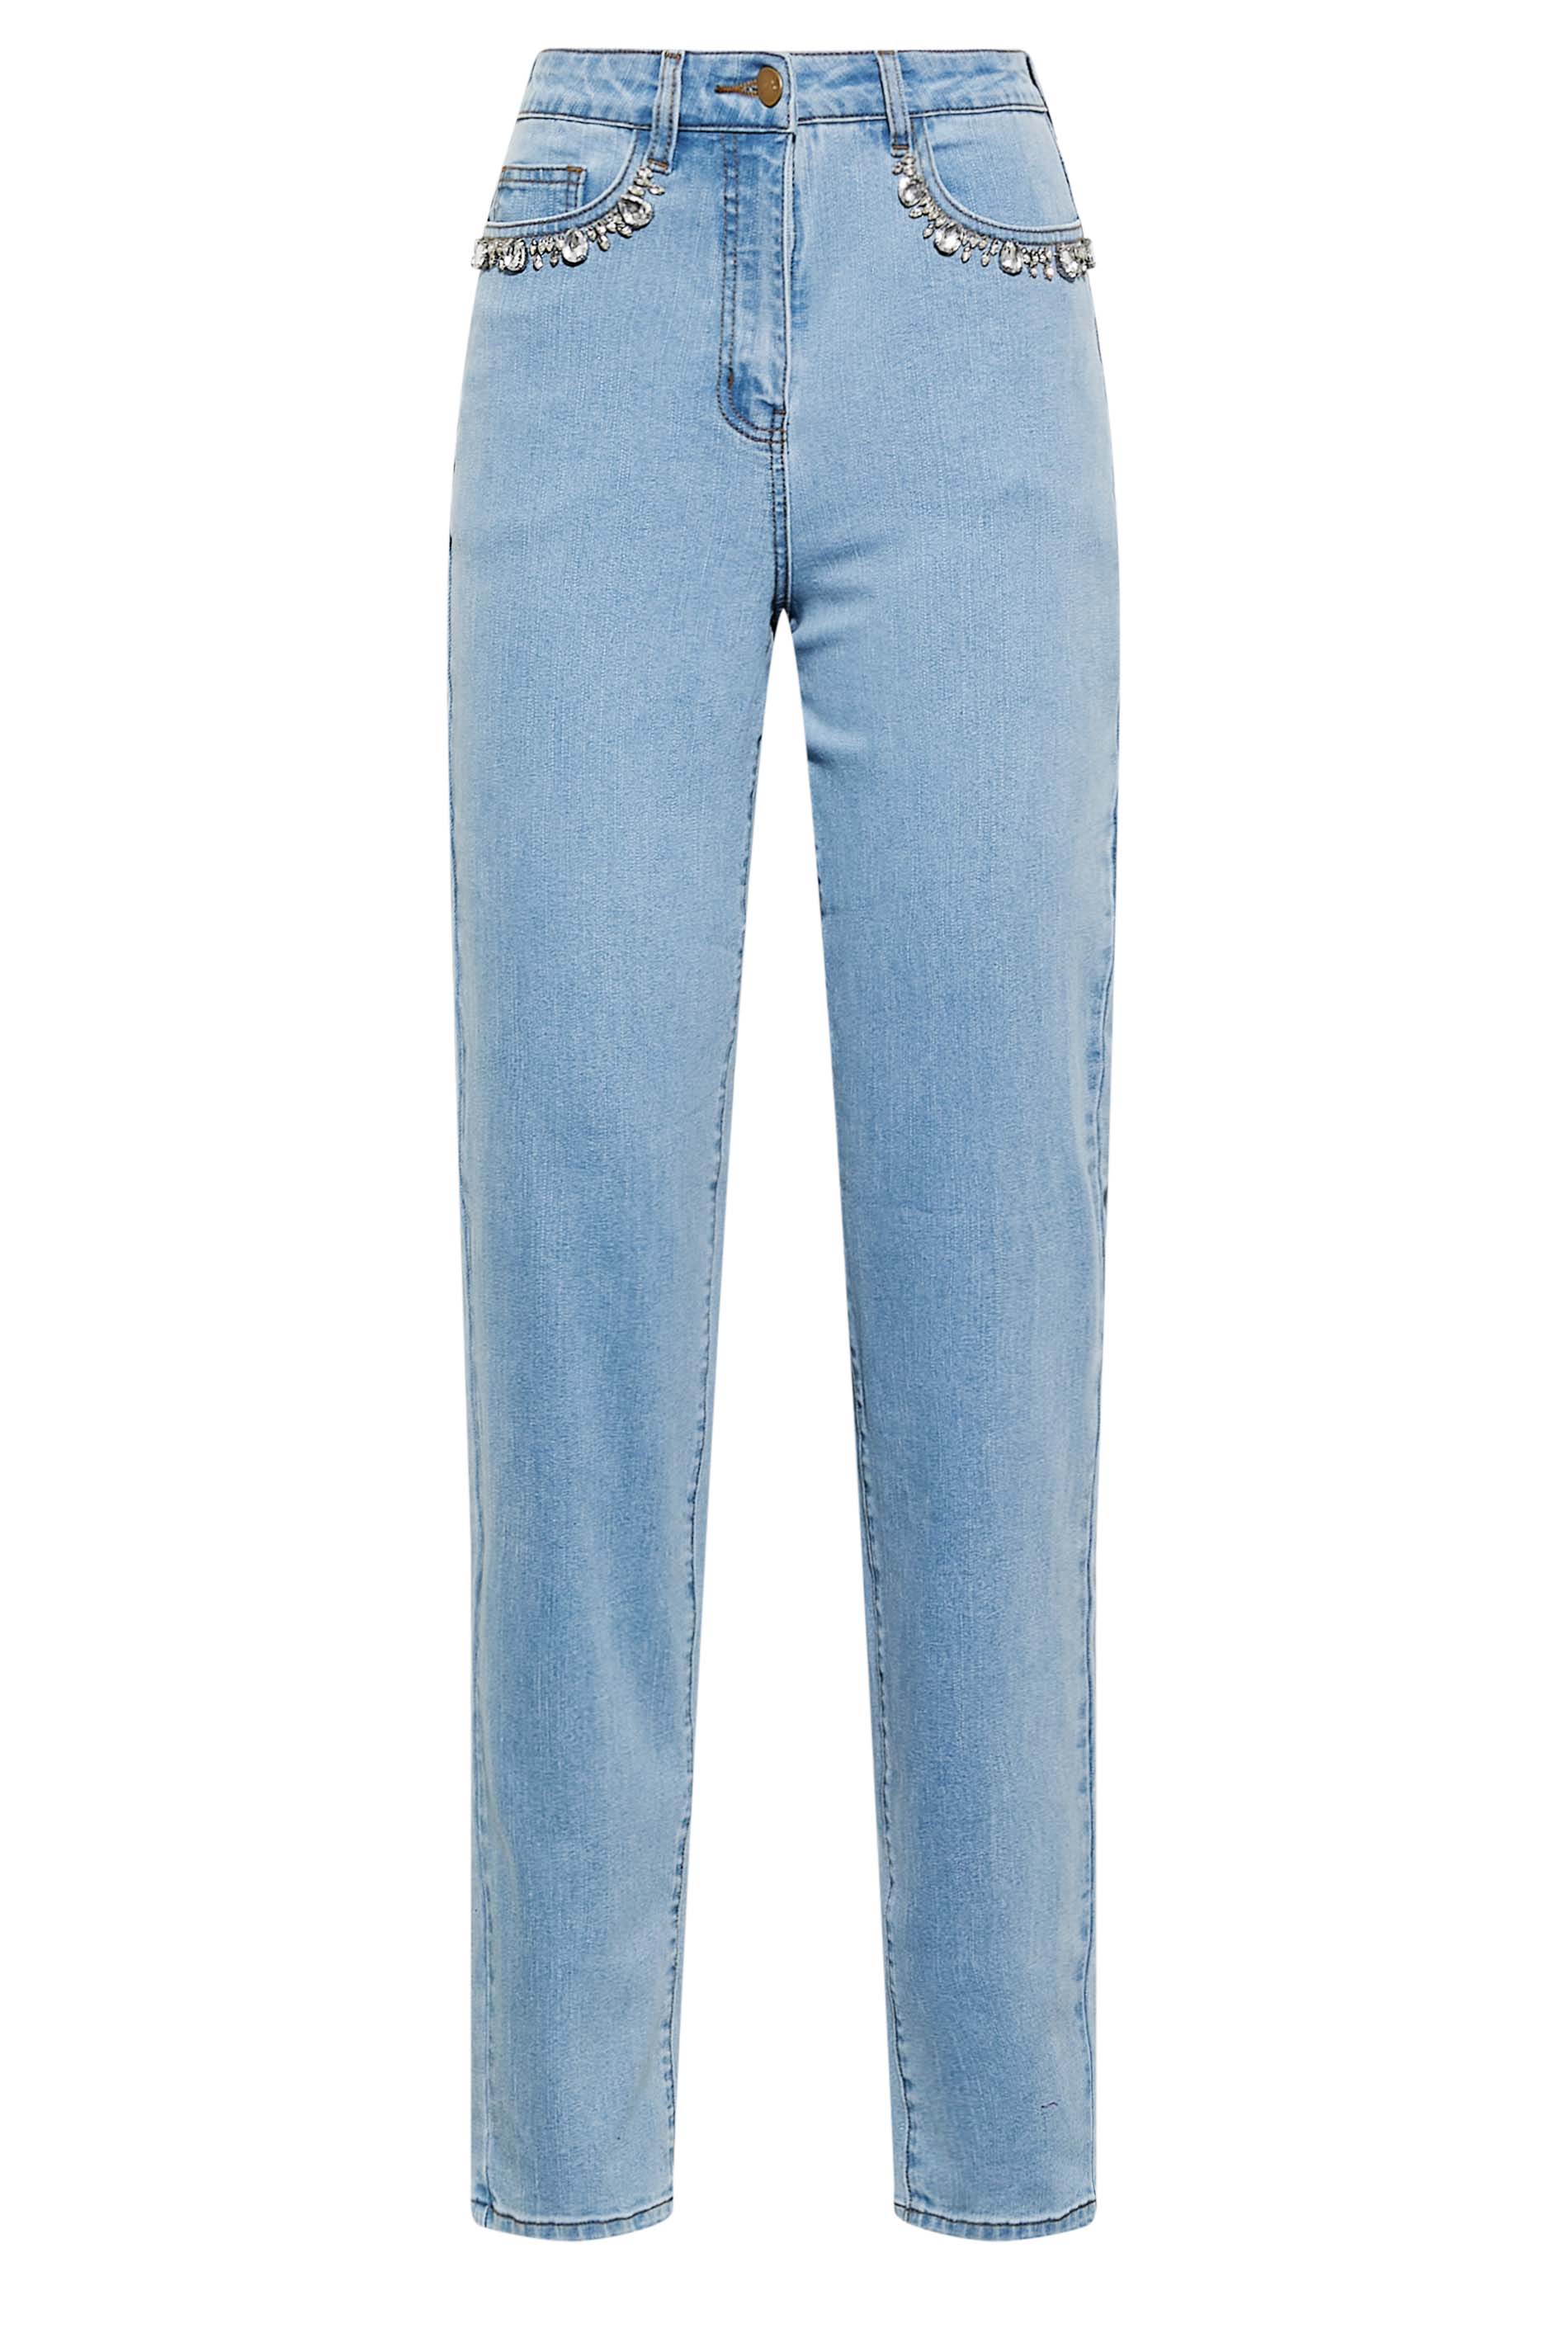 LTS Tall Women's Blue Diamante Embellished Pocket UNA Mom Jeans | Long Tall Sally 2